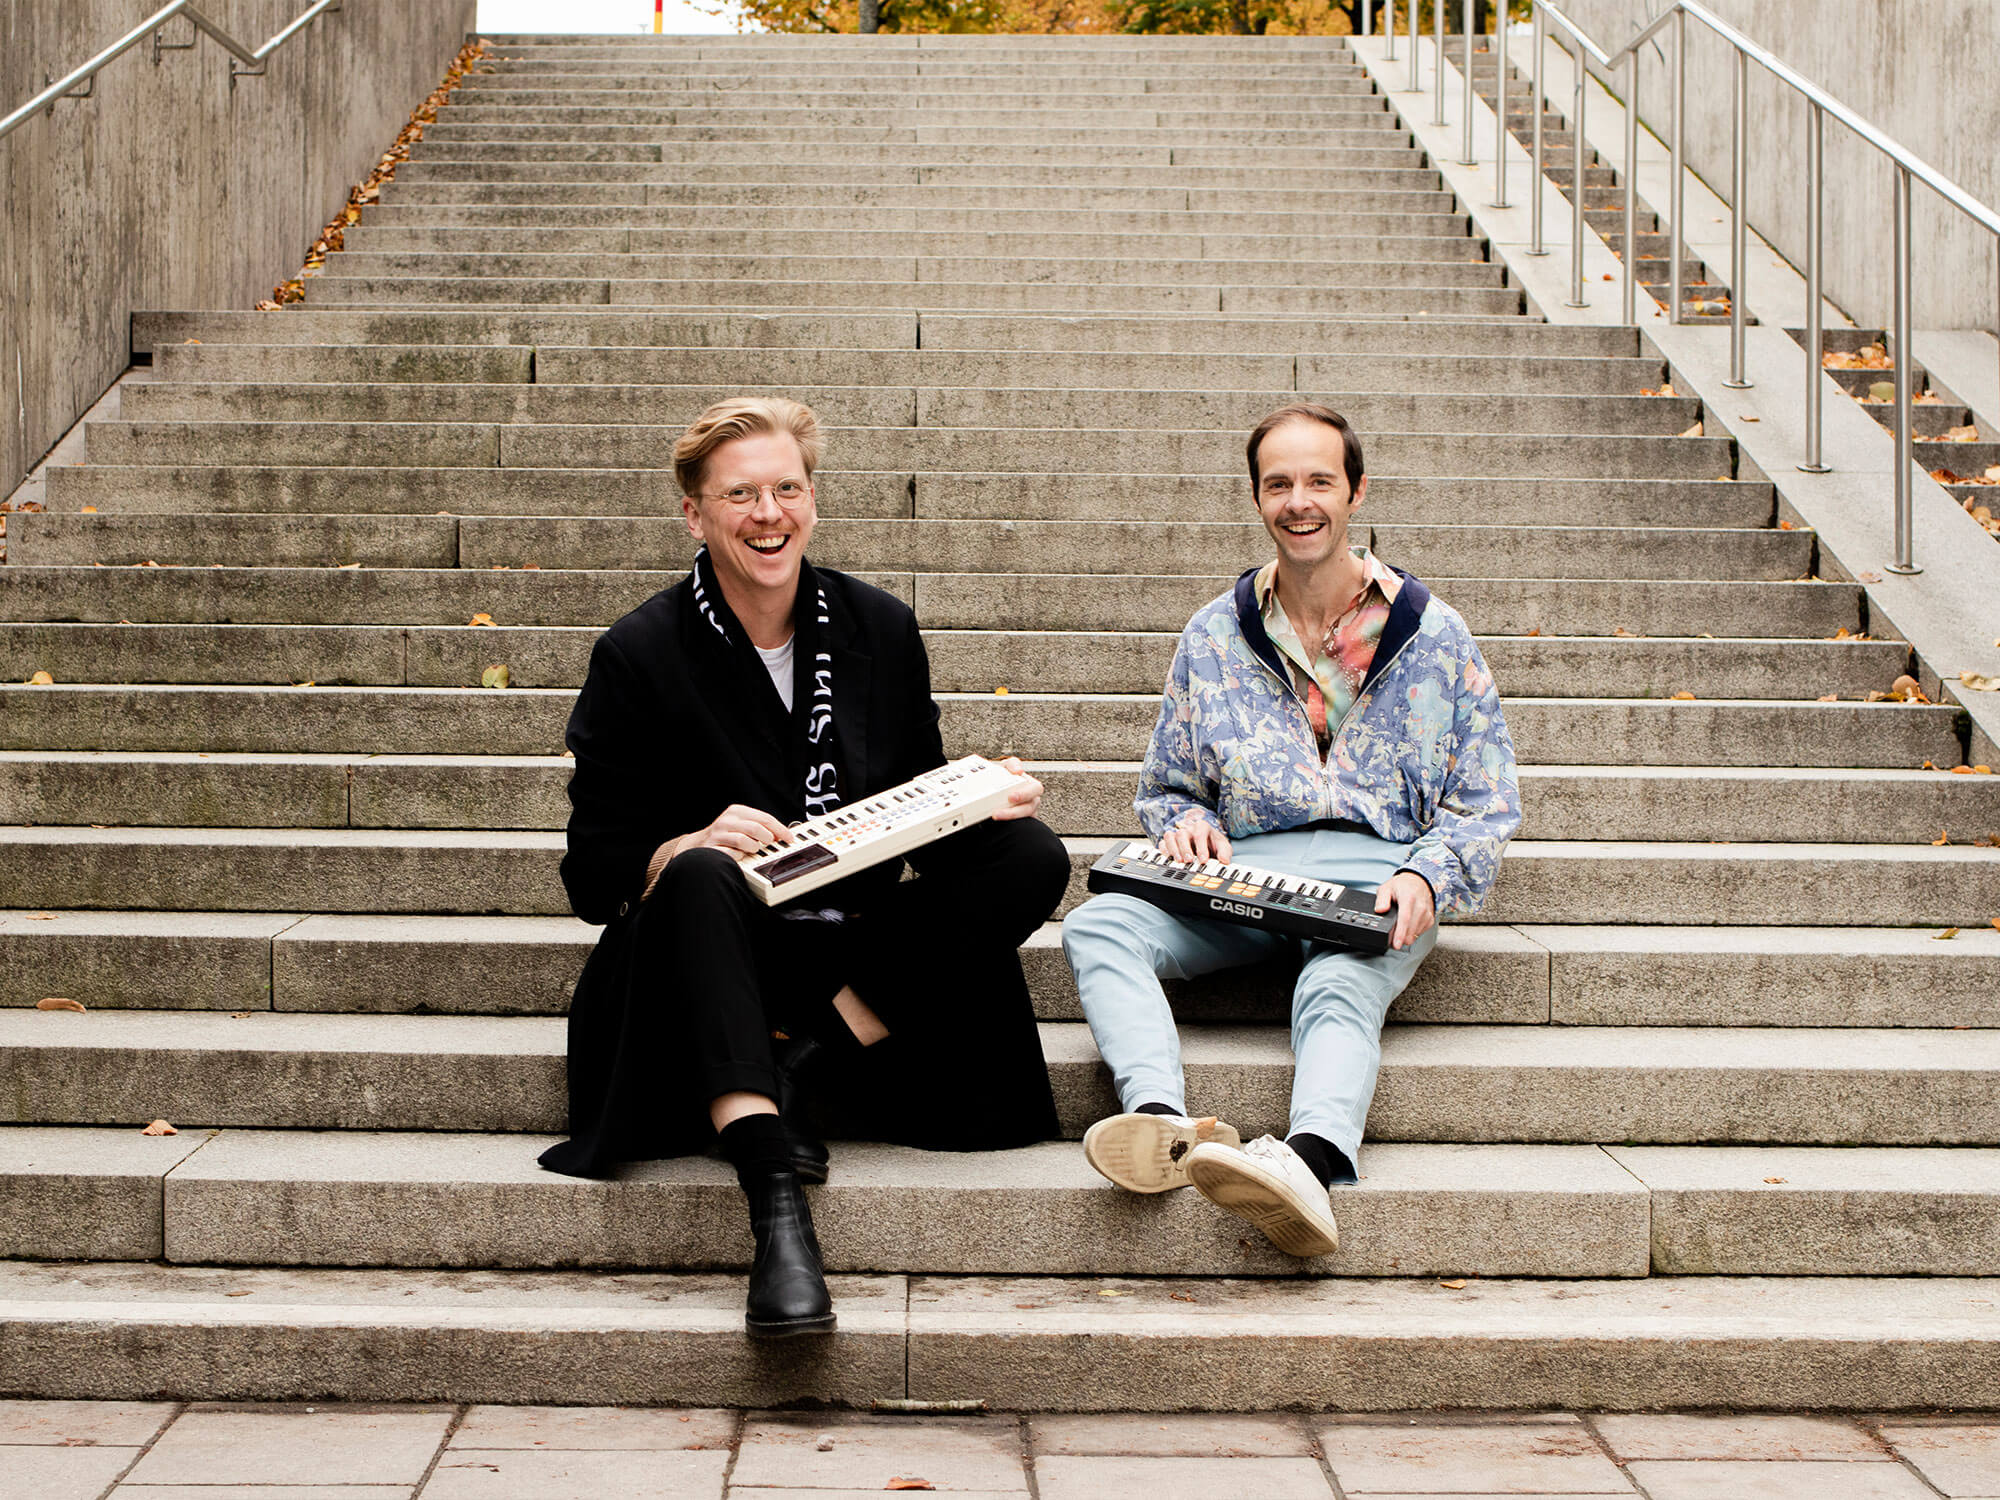 Forever 89's Svante Stadler and Rikard Jönsson sat on stairs holding classic synthesizers